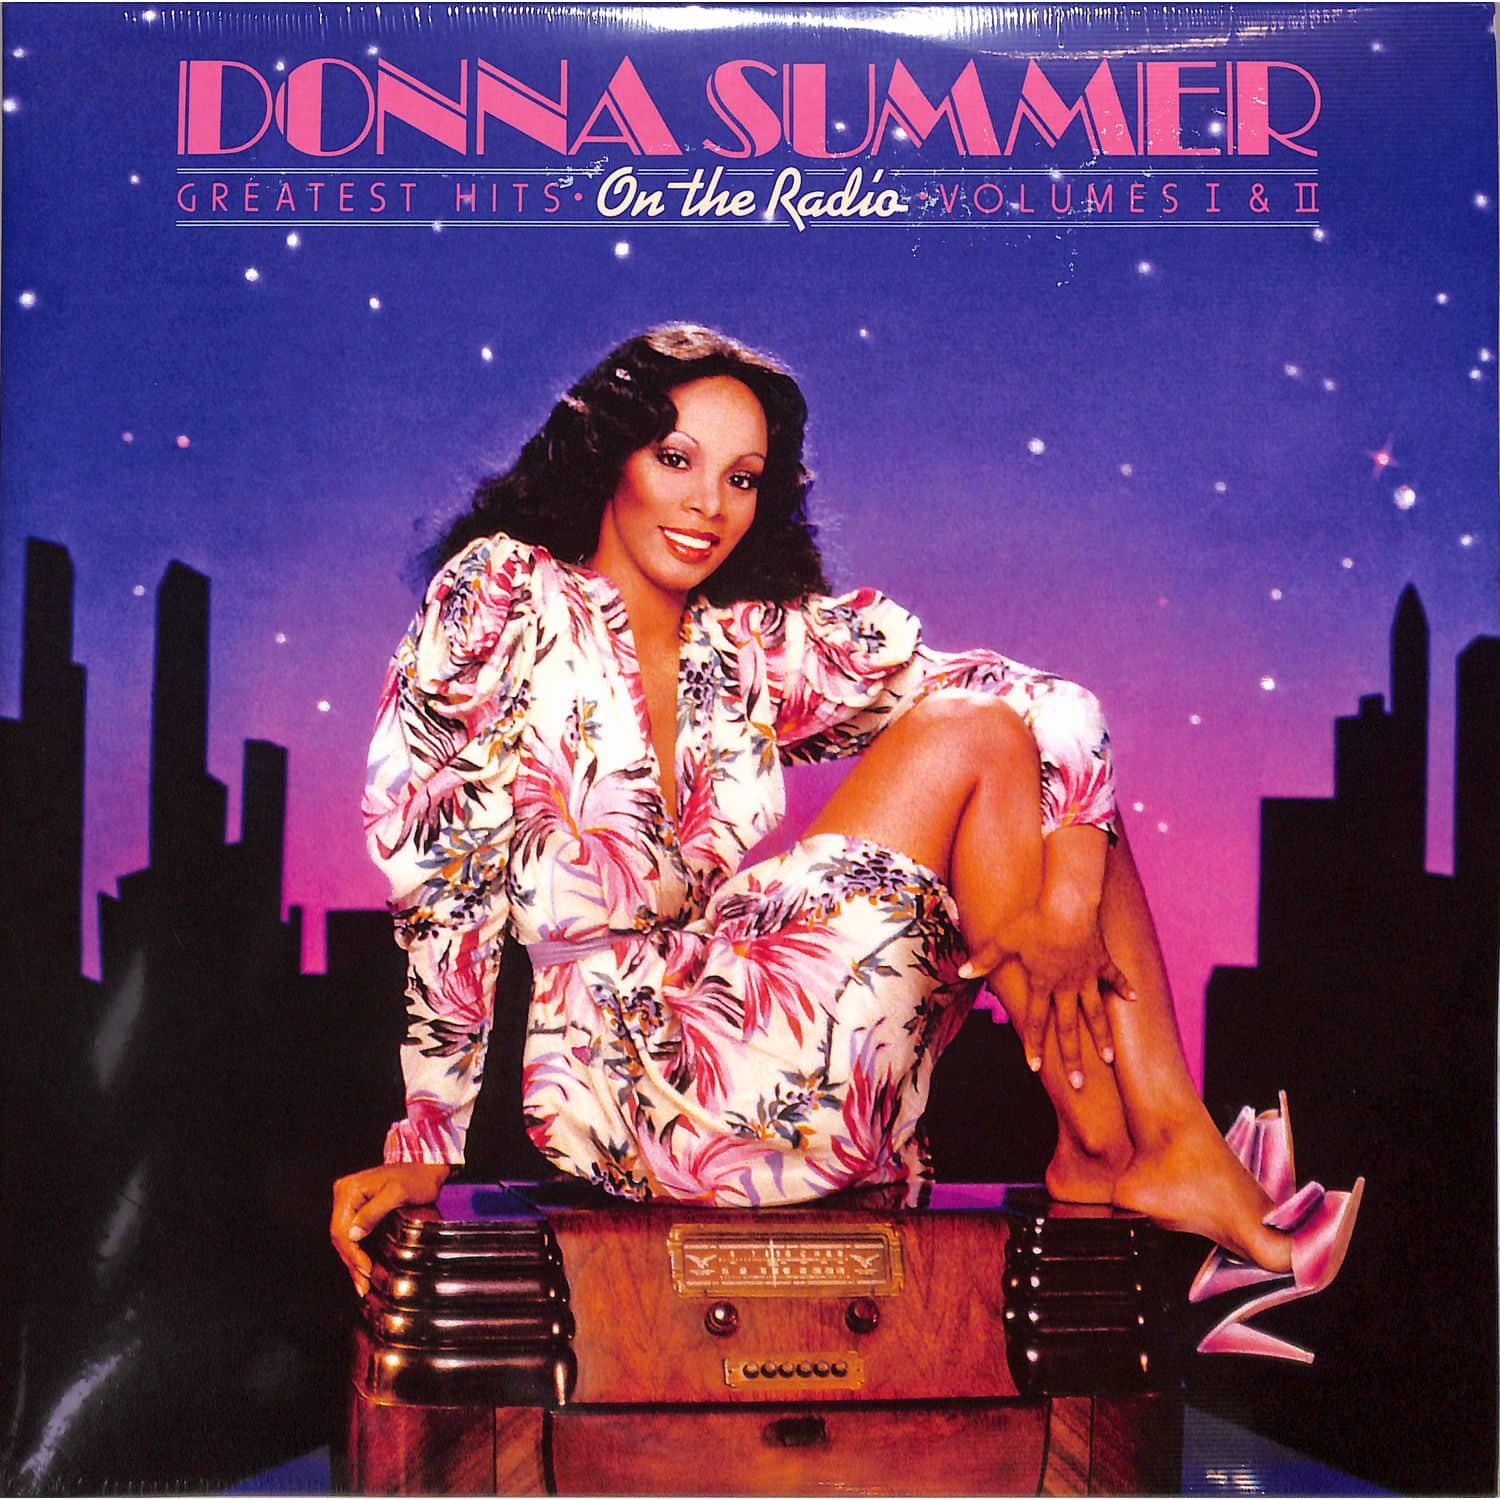 Donna Summer - ON THE RADIO: GREATEST HITS VOL. 1 & 2 